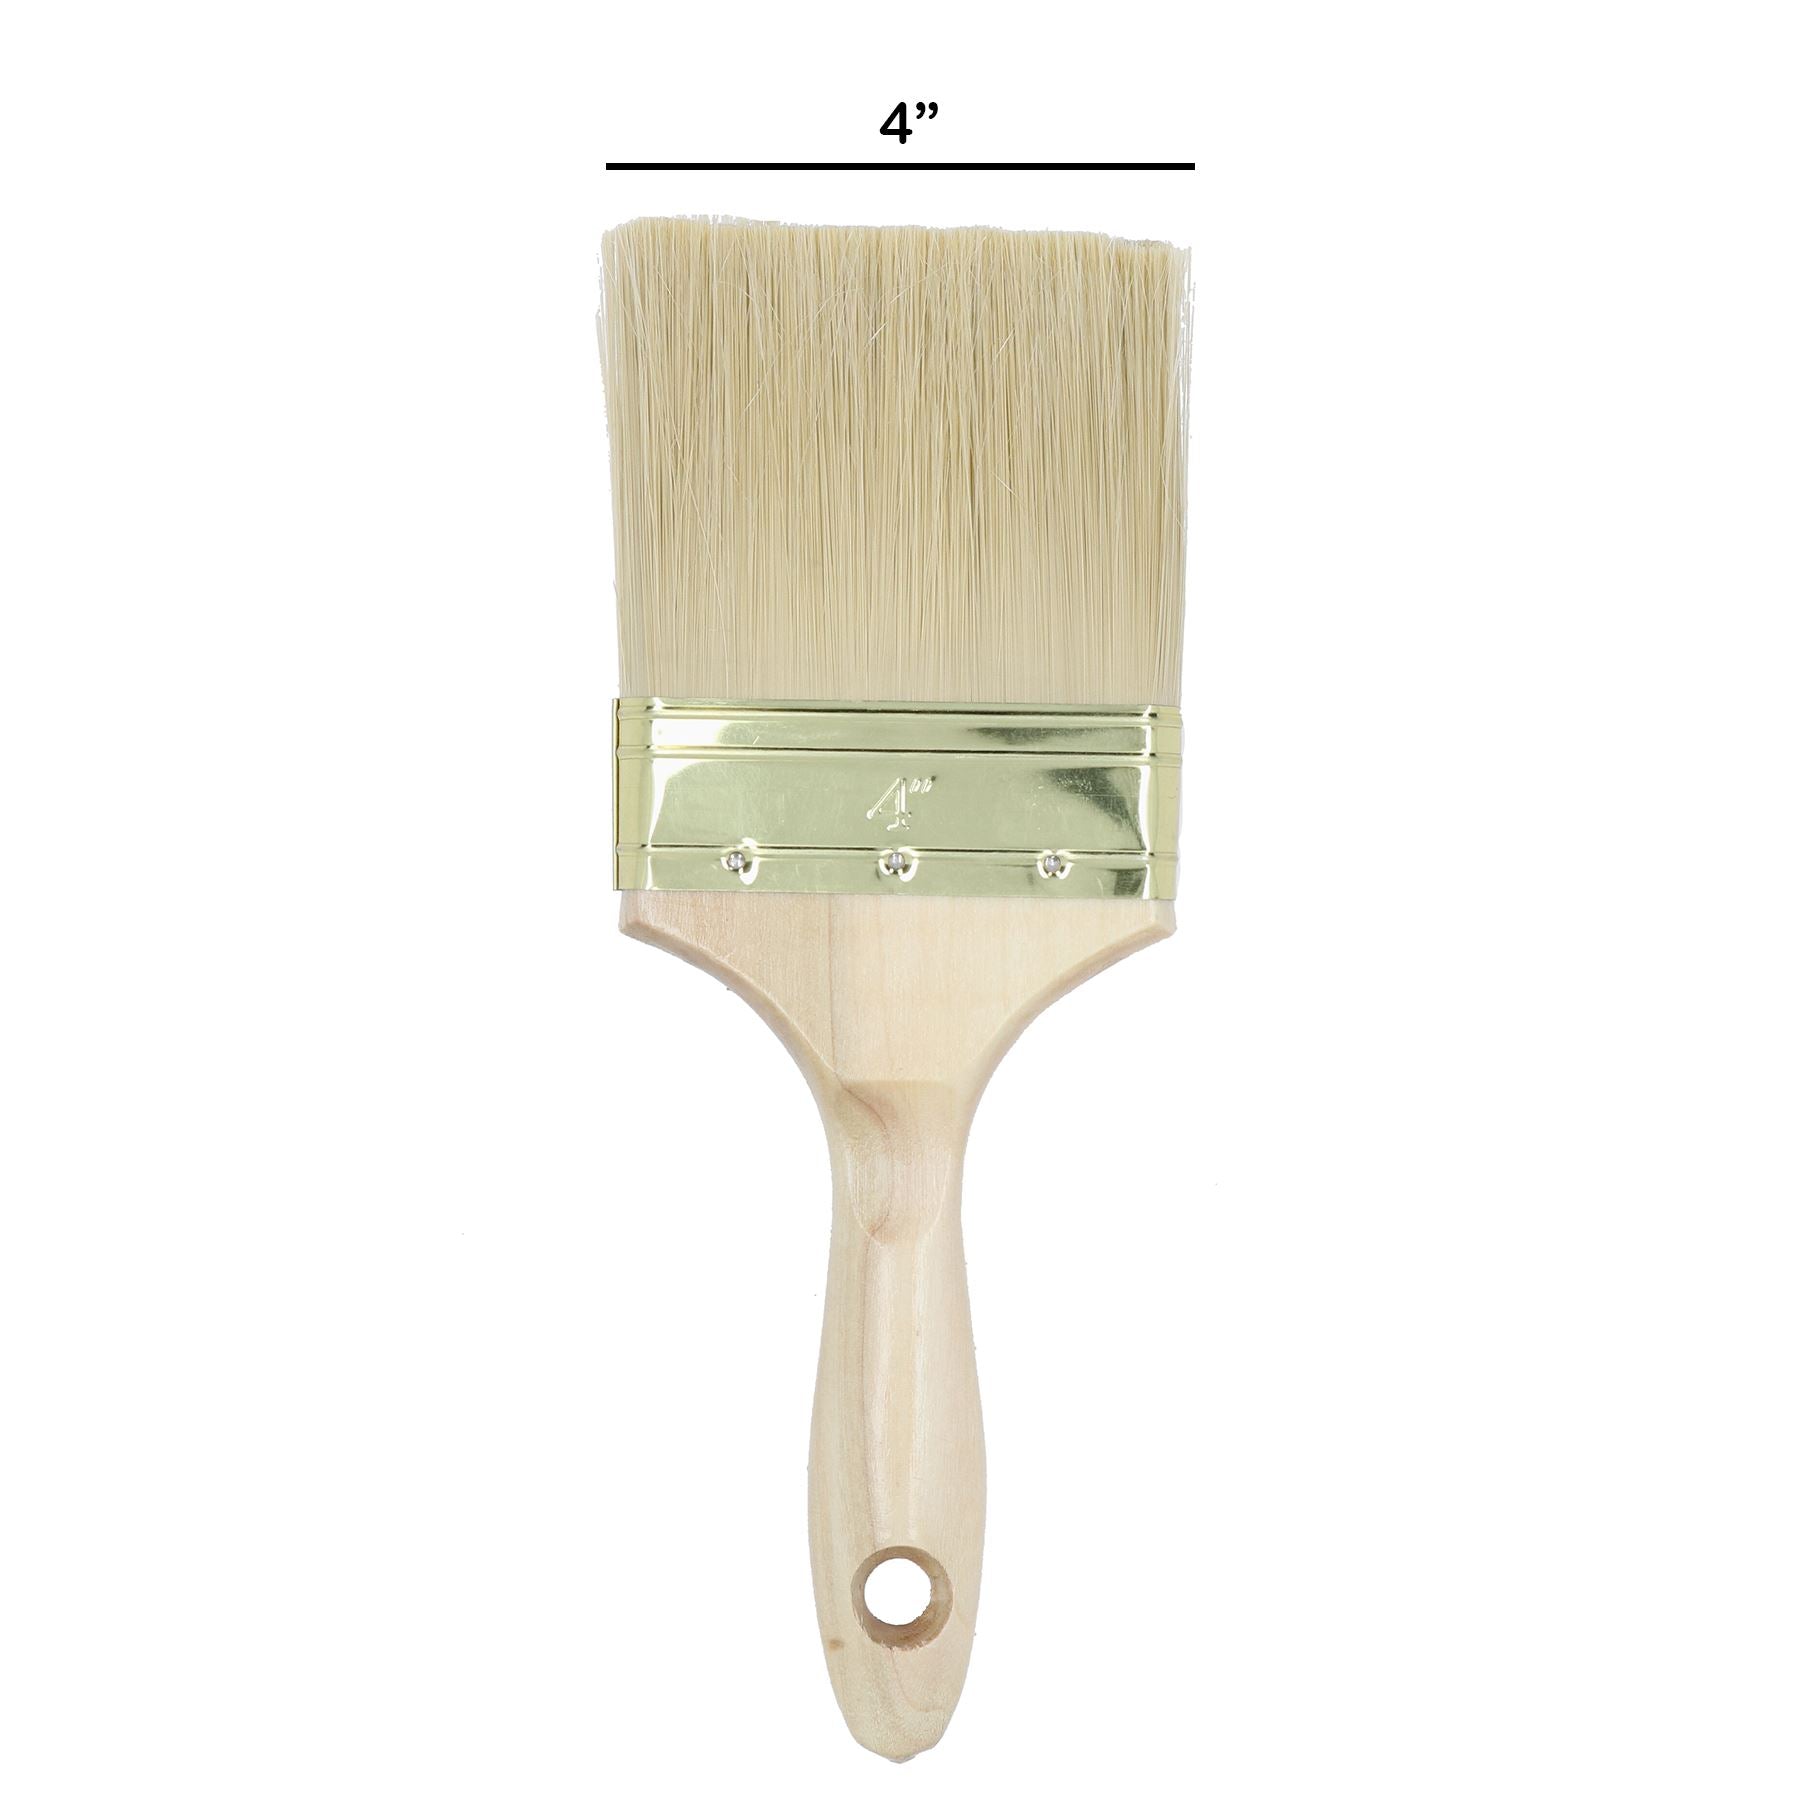 100mm Wide Nylon Paint Brush Wooden Handle for Sheds Decking Fences